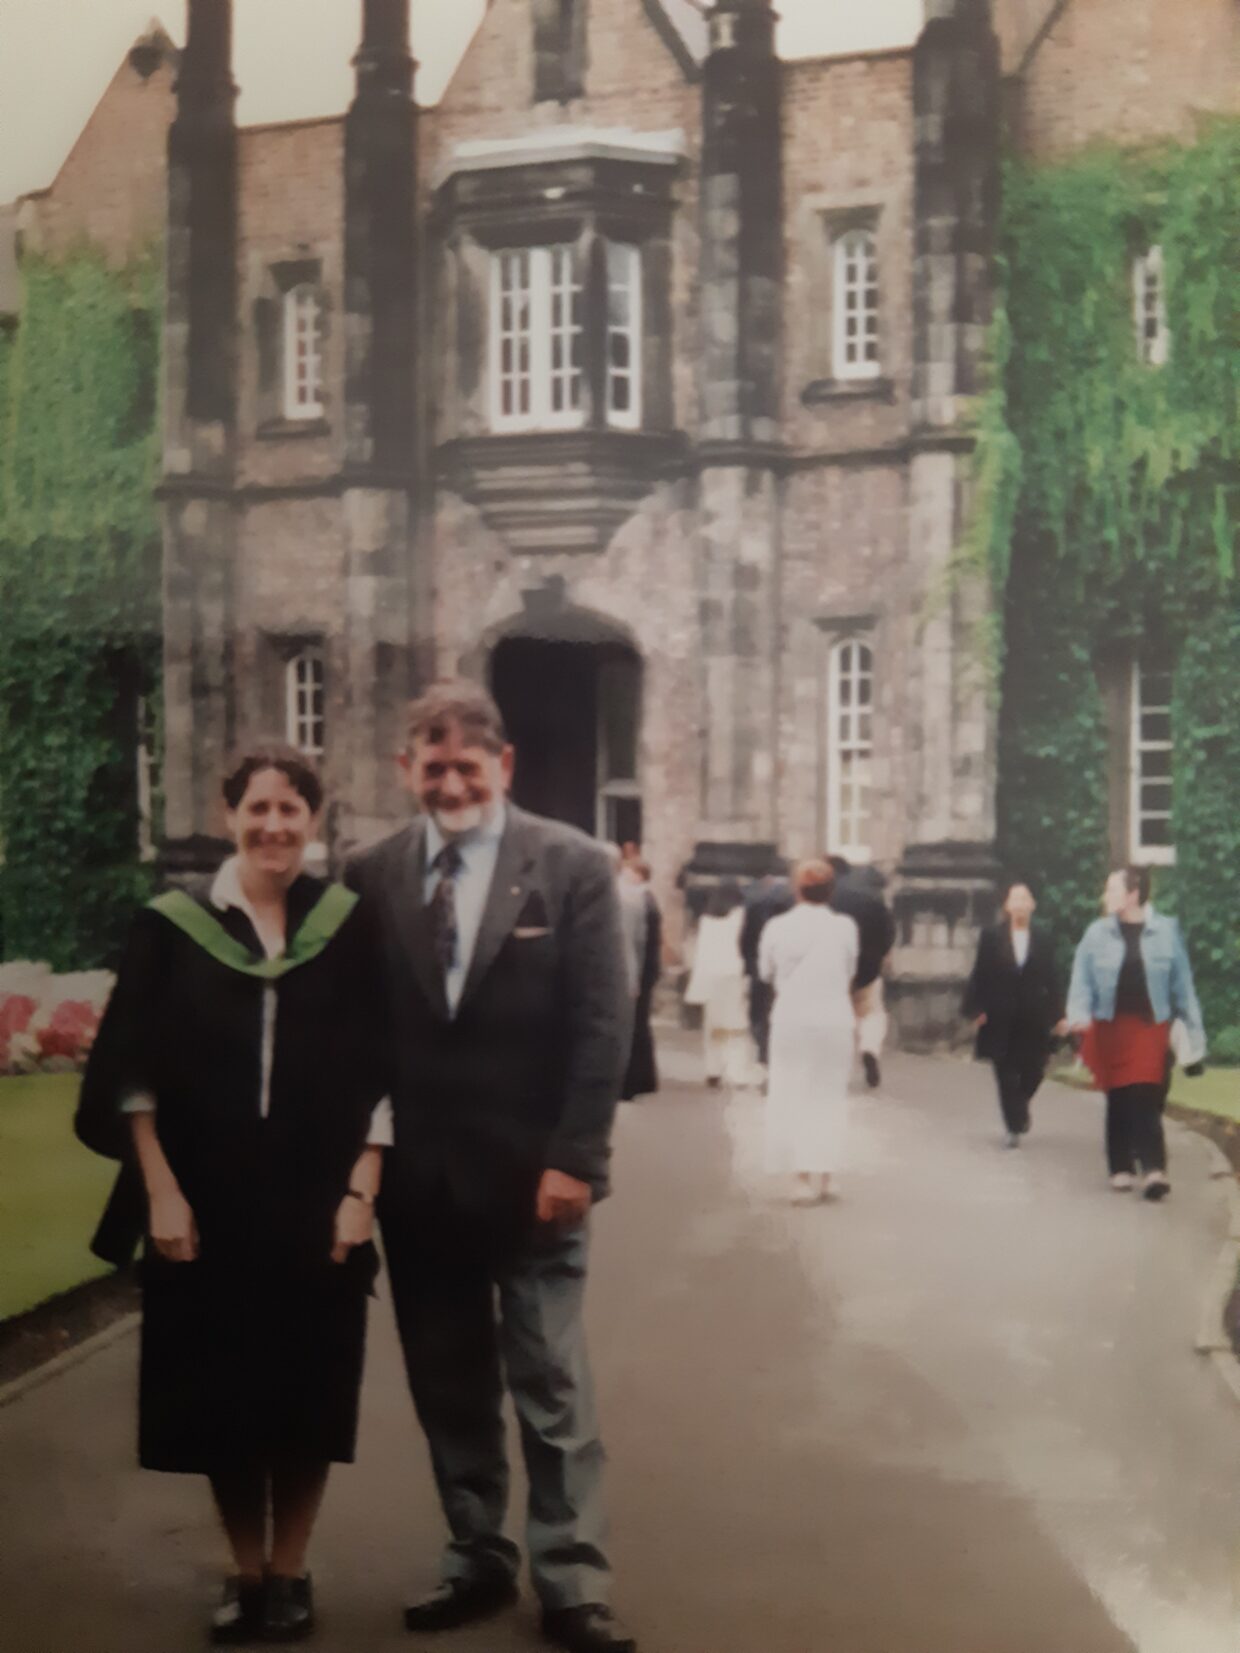 Jennifer is wearing a graduation gown and standing outside of the Lord Mayor's Walk entrance. She is standing with her father who is wearing a suit.